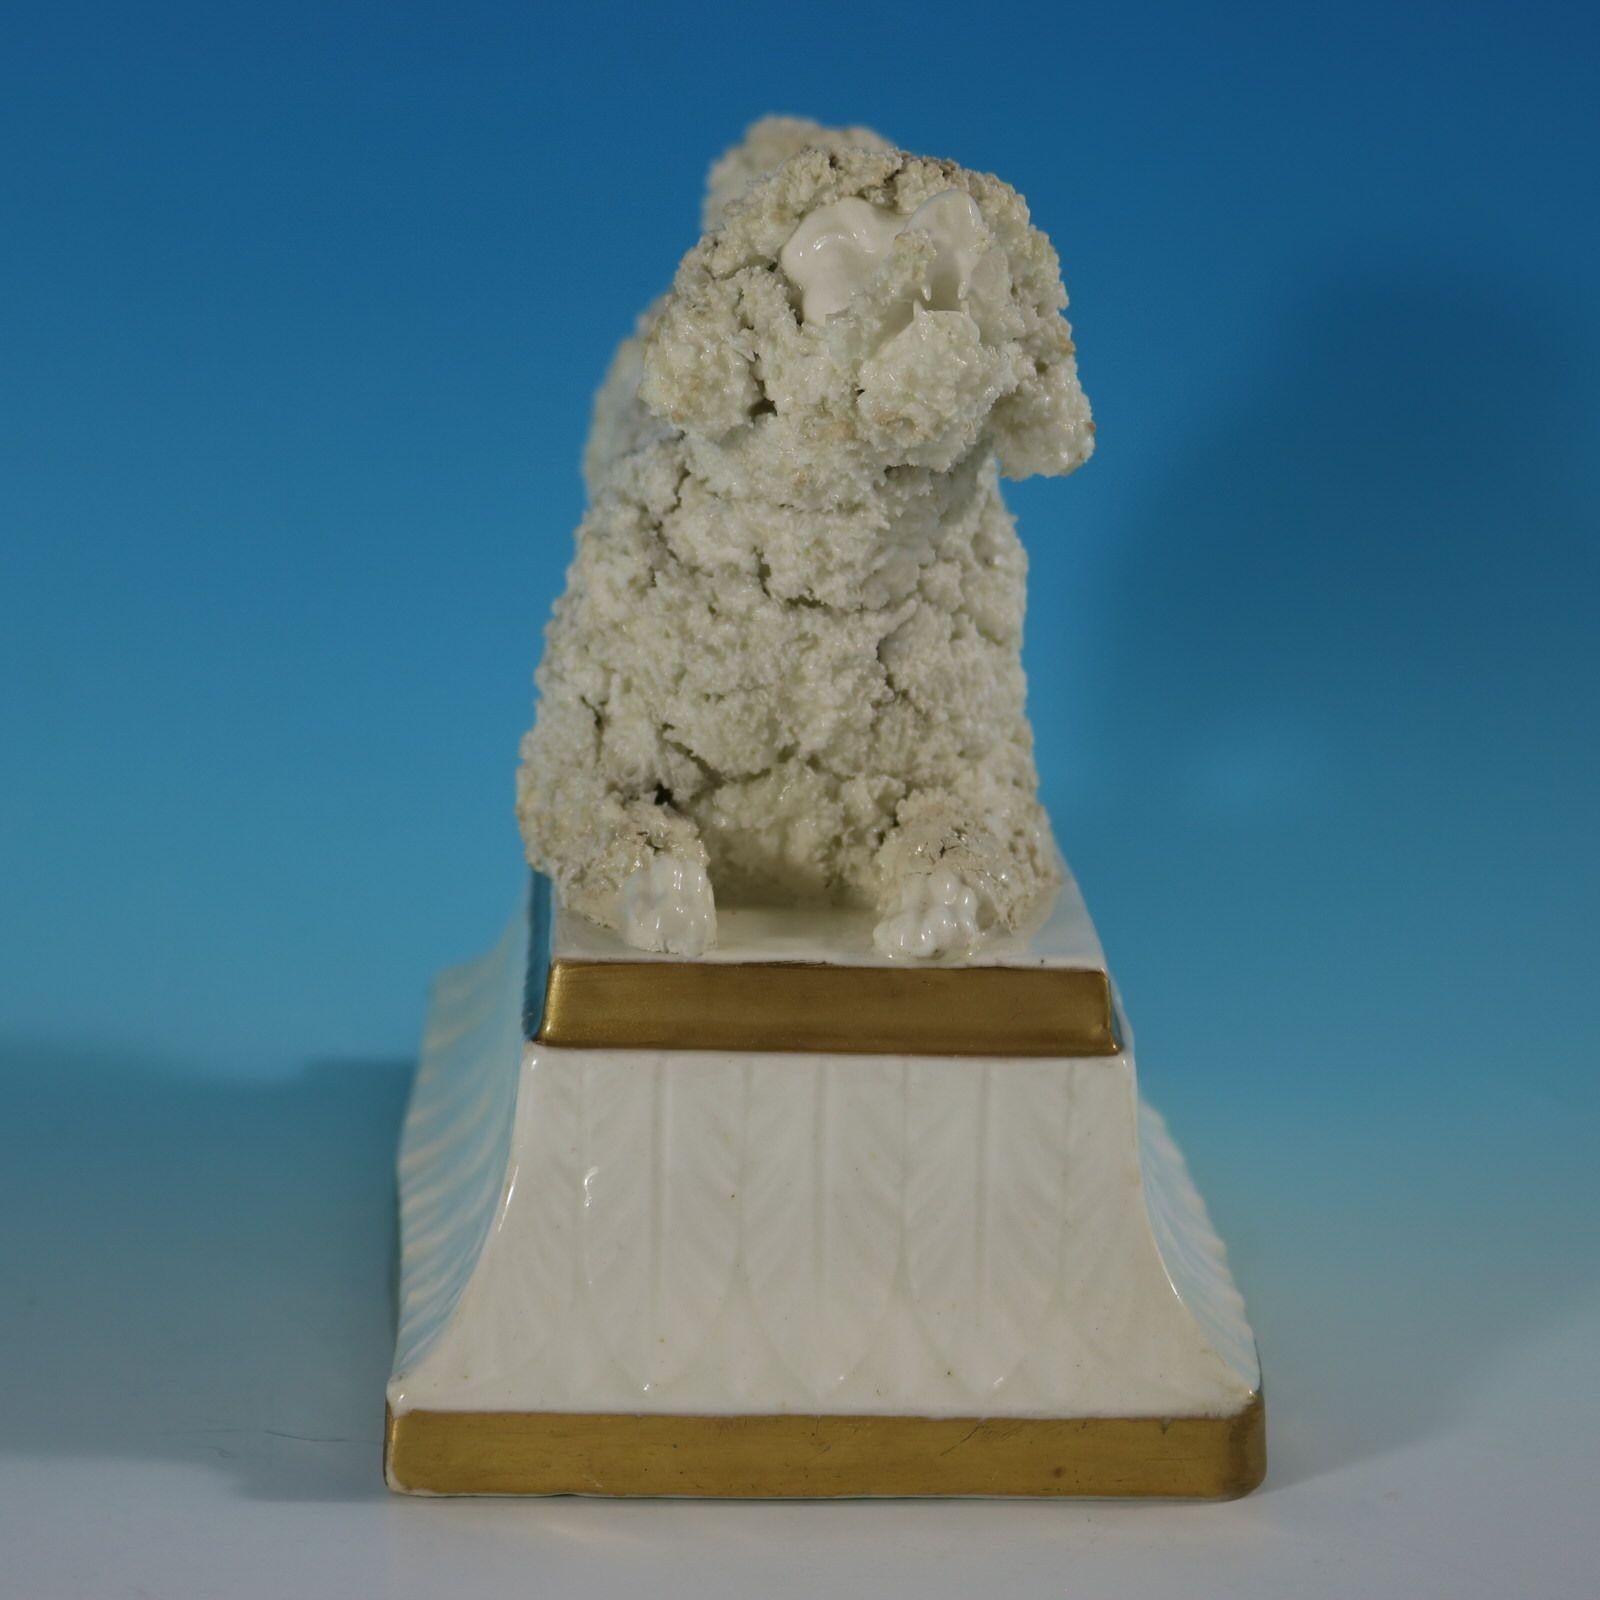 English Large Staffordshire Pottery Porcellaneous Poodle For Sale